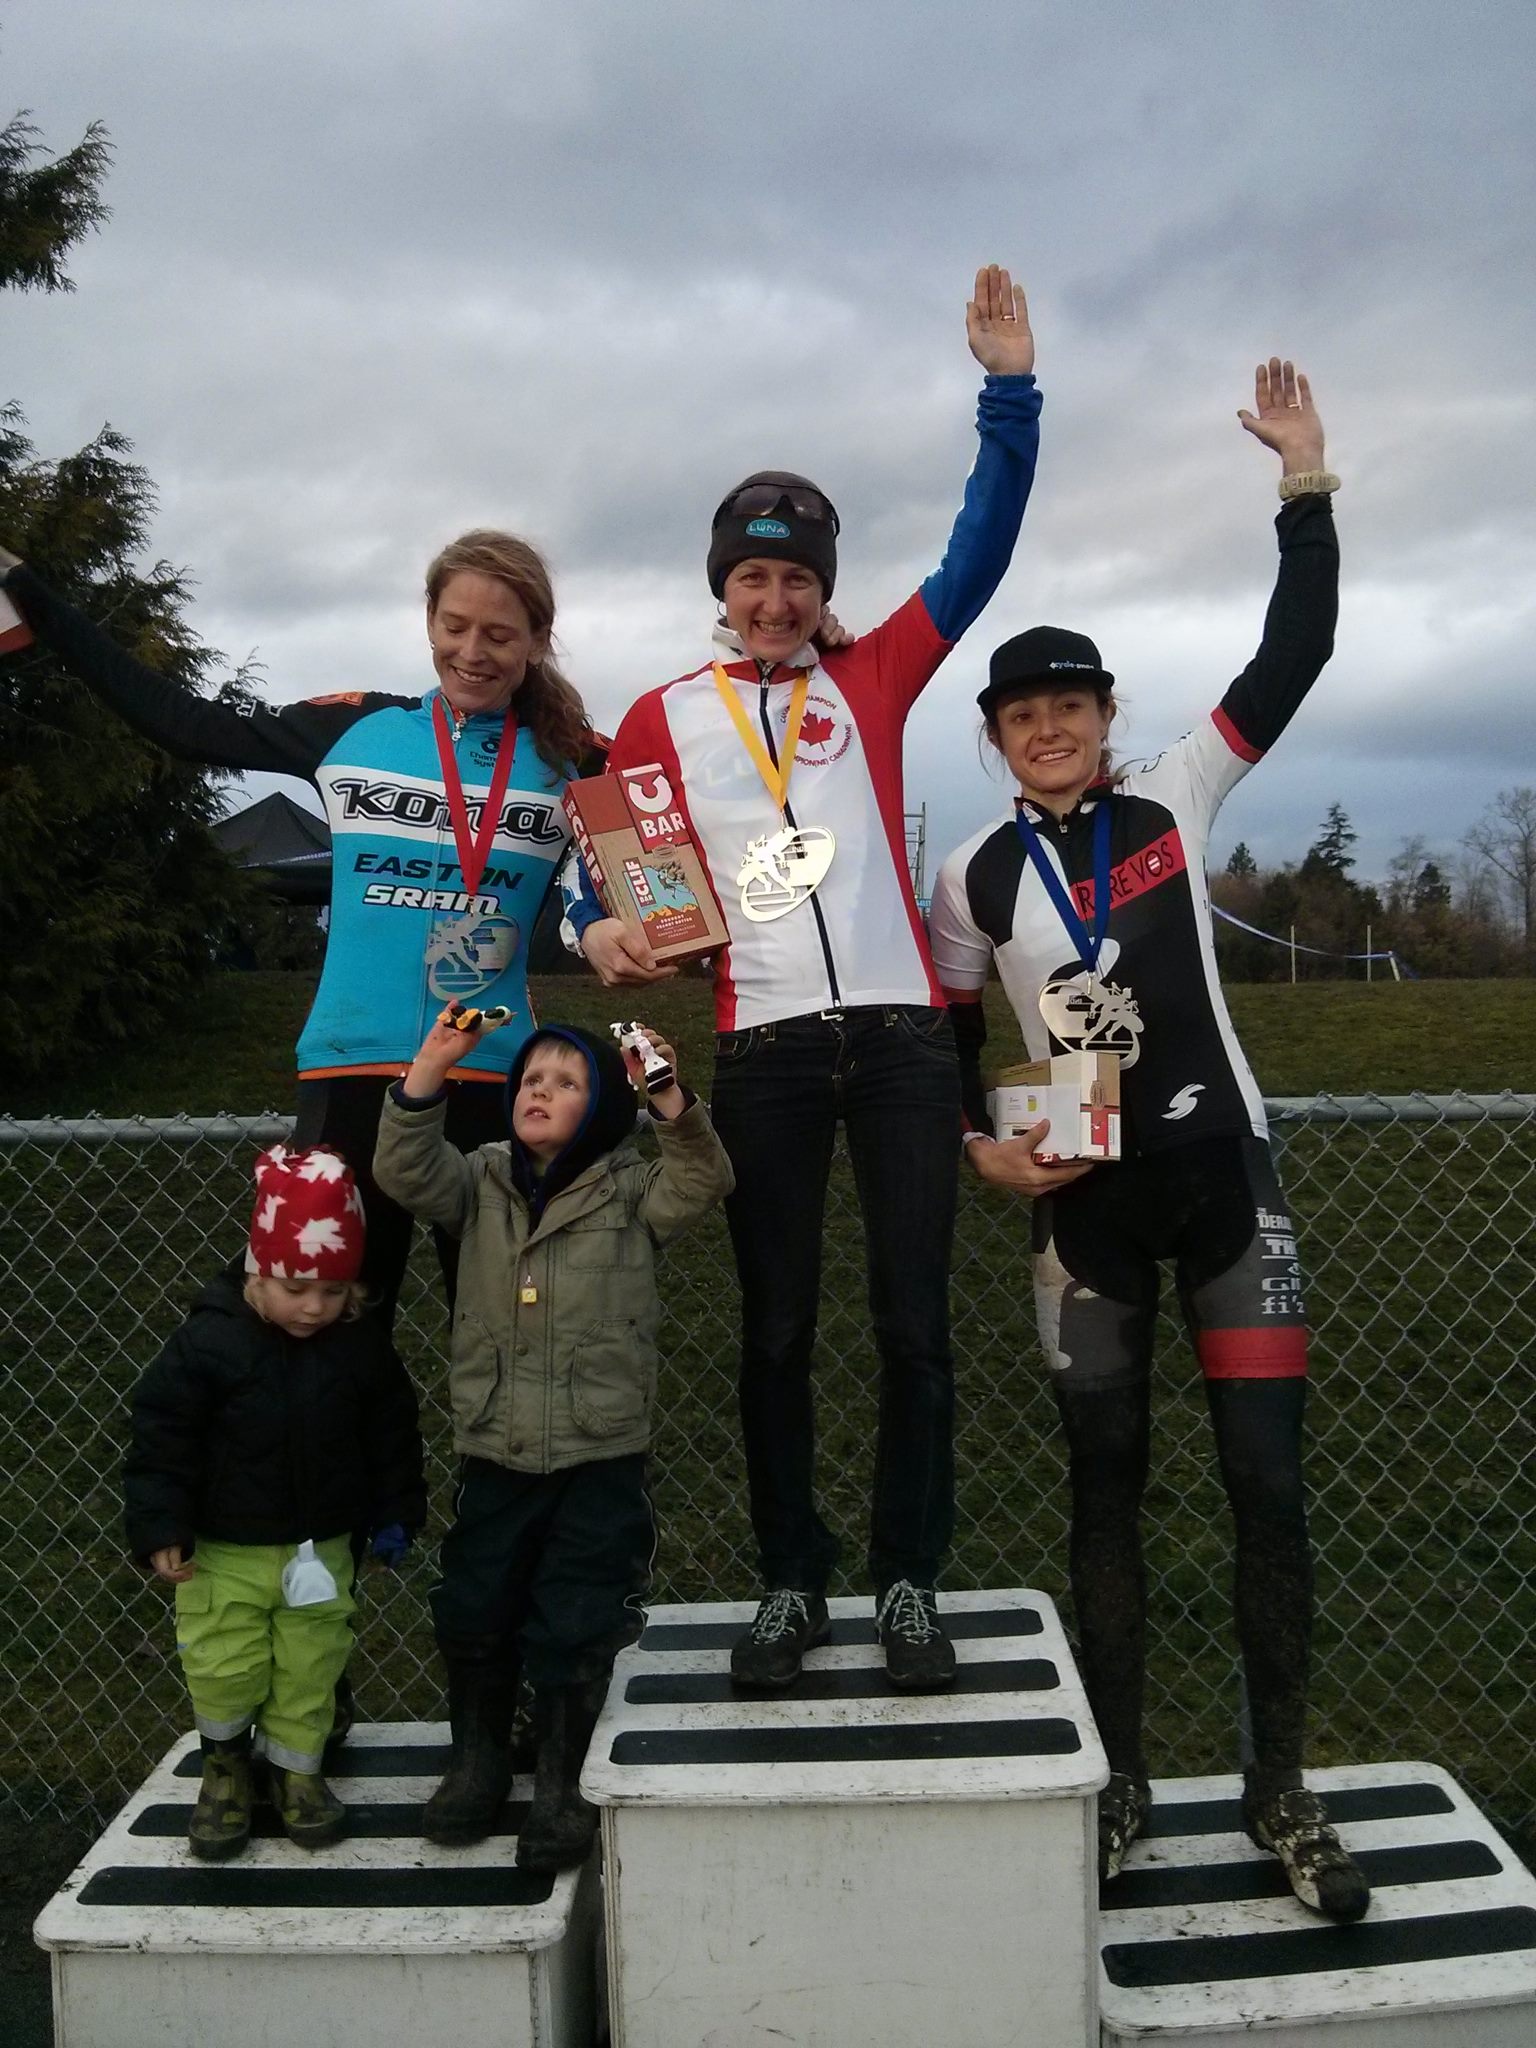 Cyclocross winners sporting medals manufactured by Hansen Industries